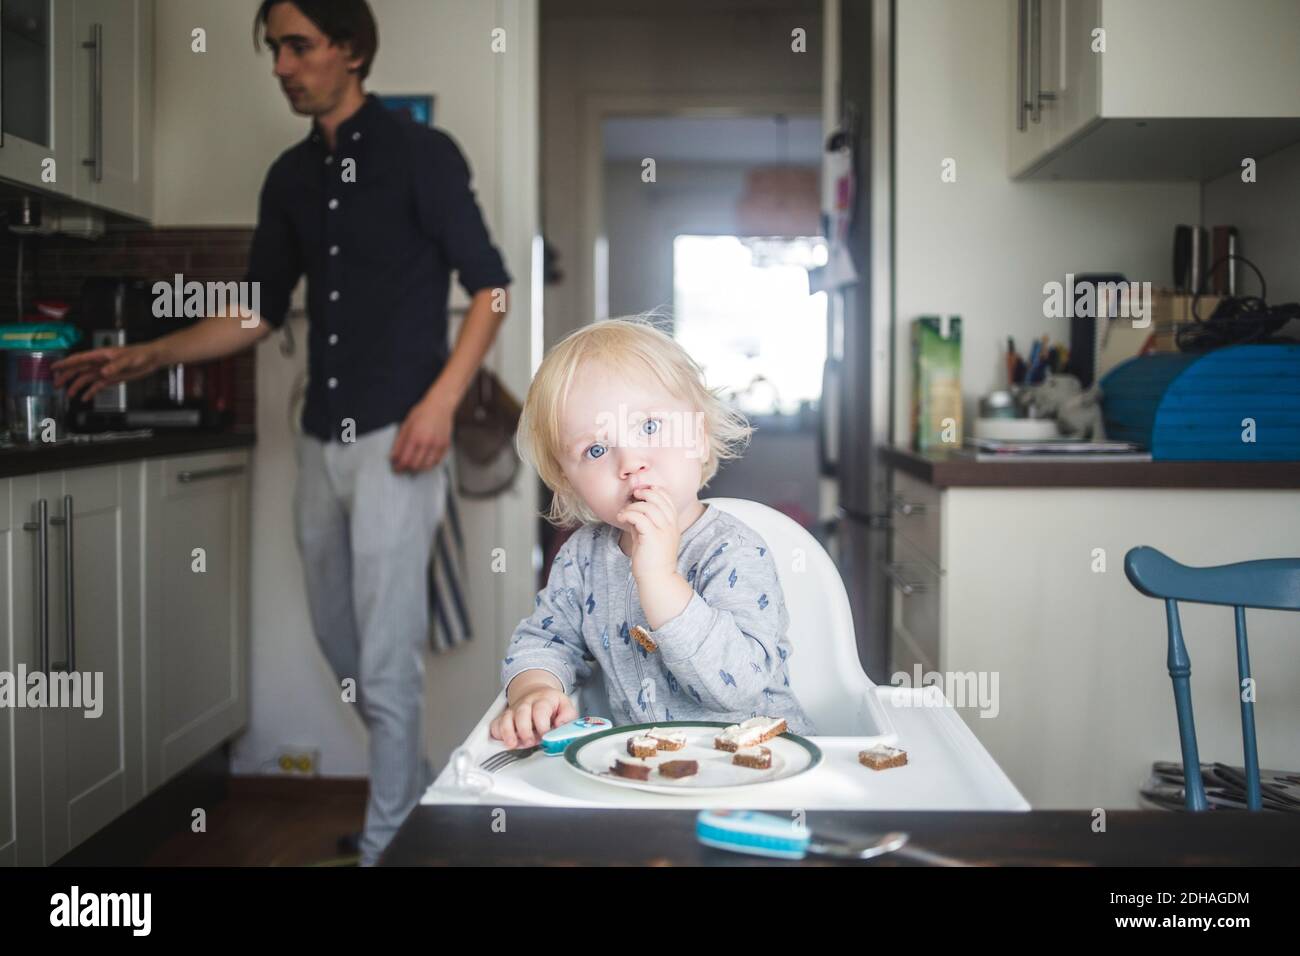 Portrait of blond baby boy eating while sitting on high chair at kitchen with father in background Stock Photo